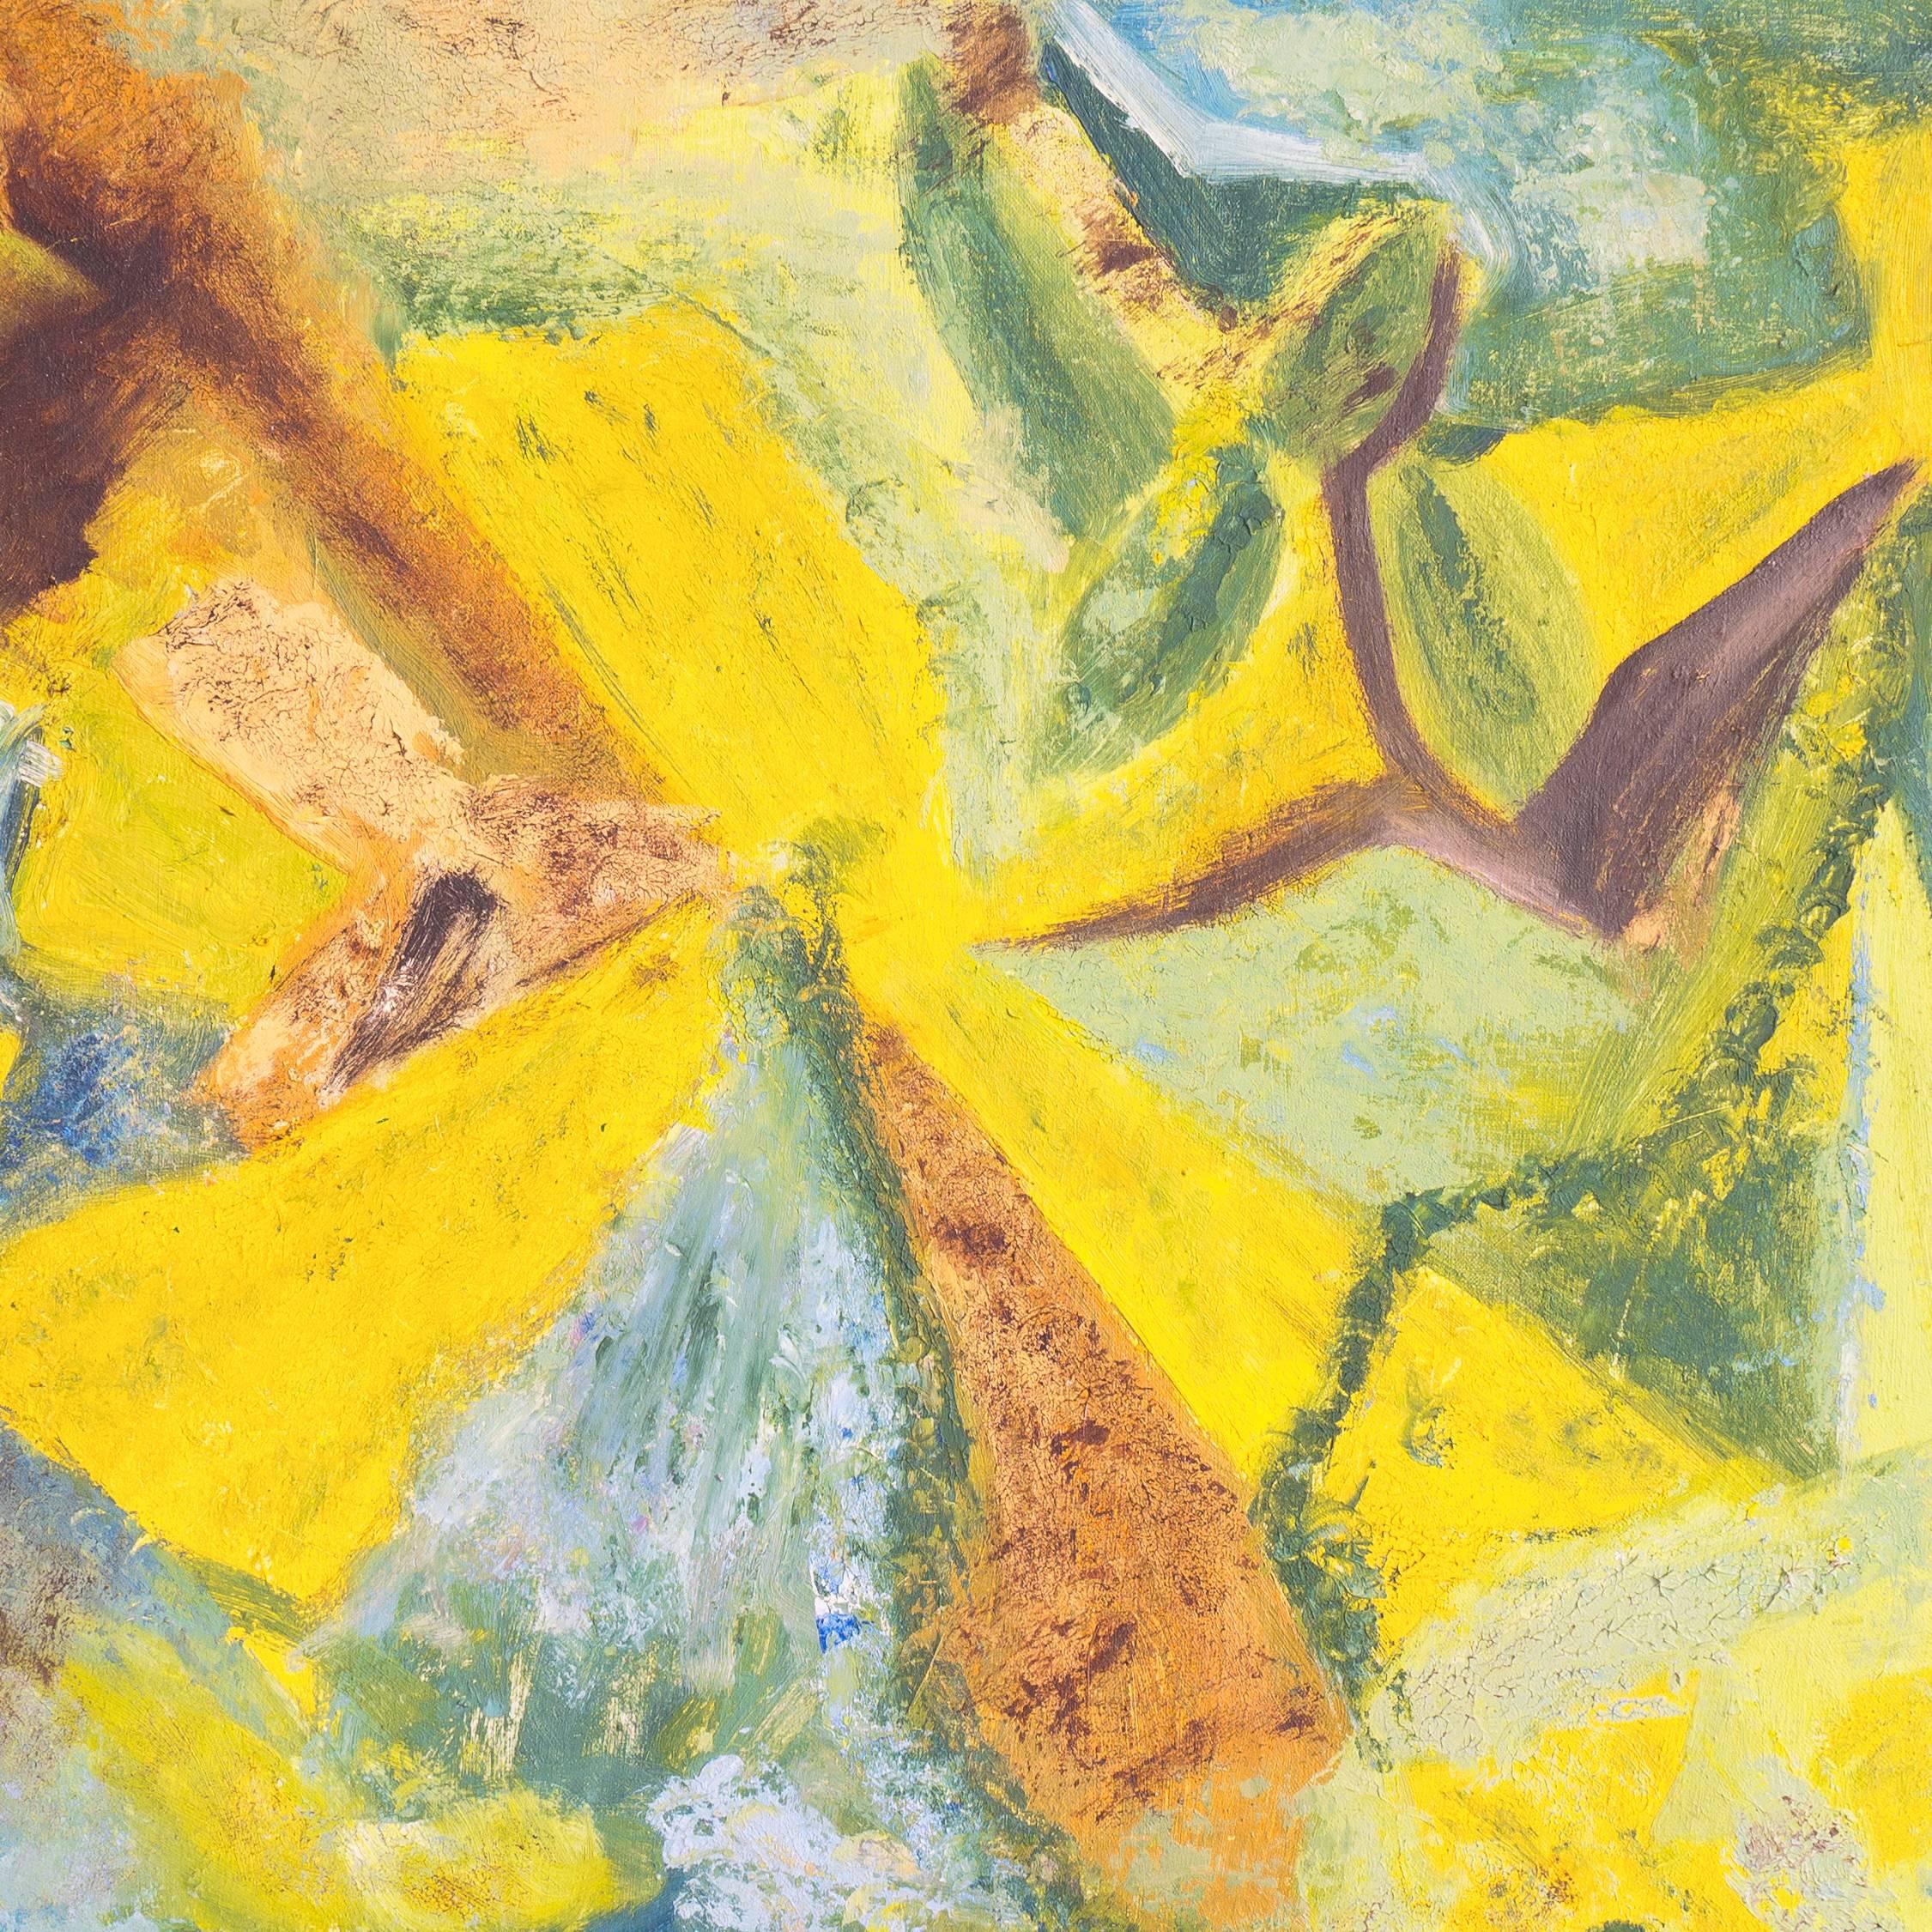 Signed lower right, 'Shafsky' and painted circa 1960.

A kinetic, mid-century oil abstract comprising a structurally inter-related field of jade and saffron contrasted against secondary areas of ochre and lilac. 